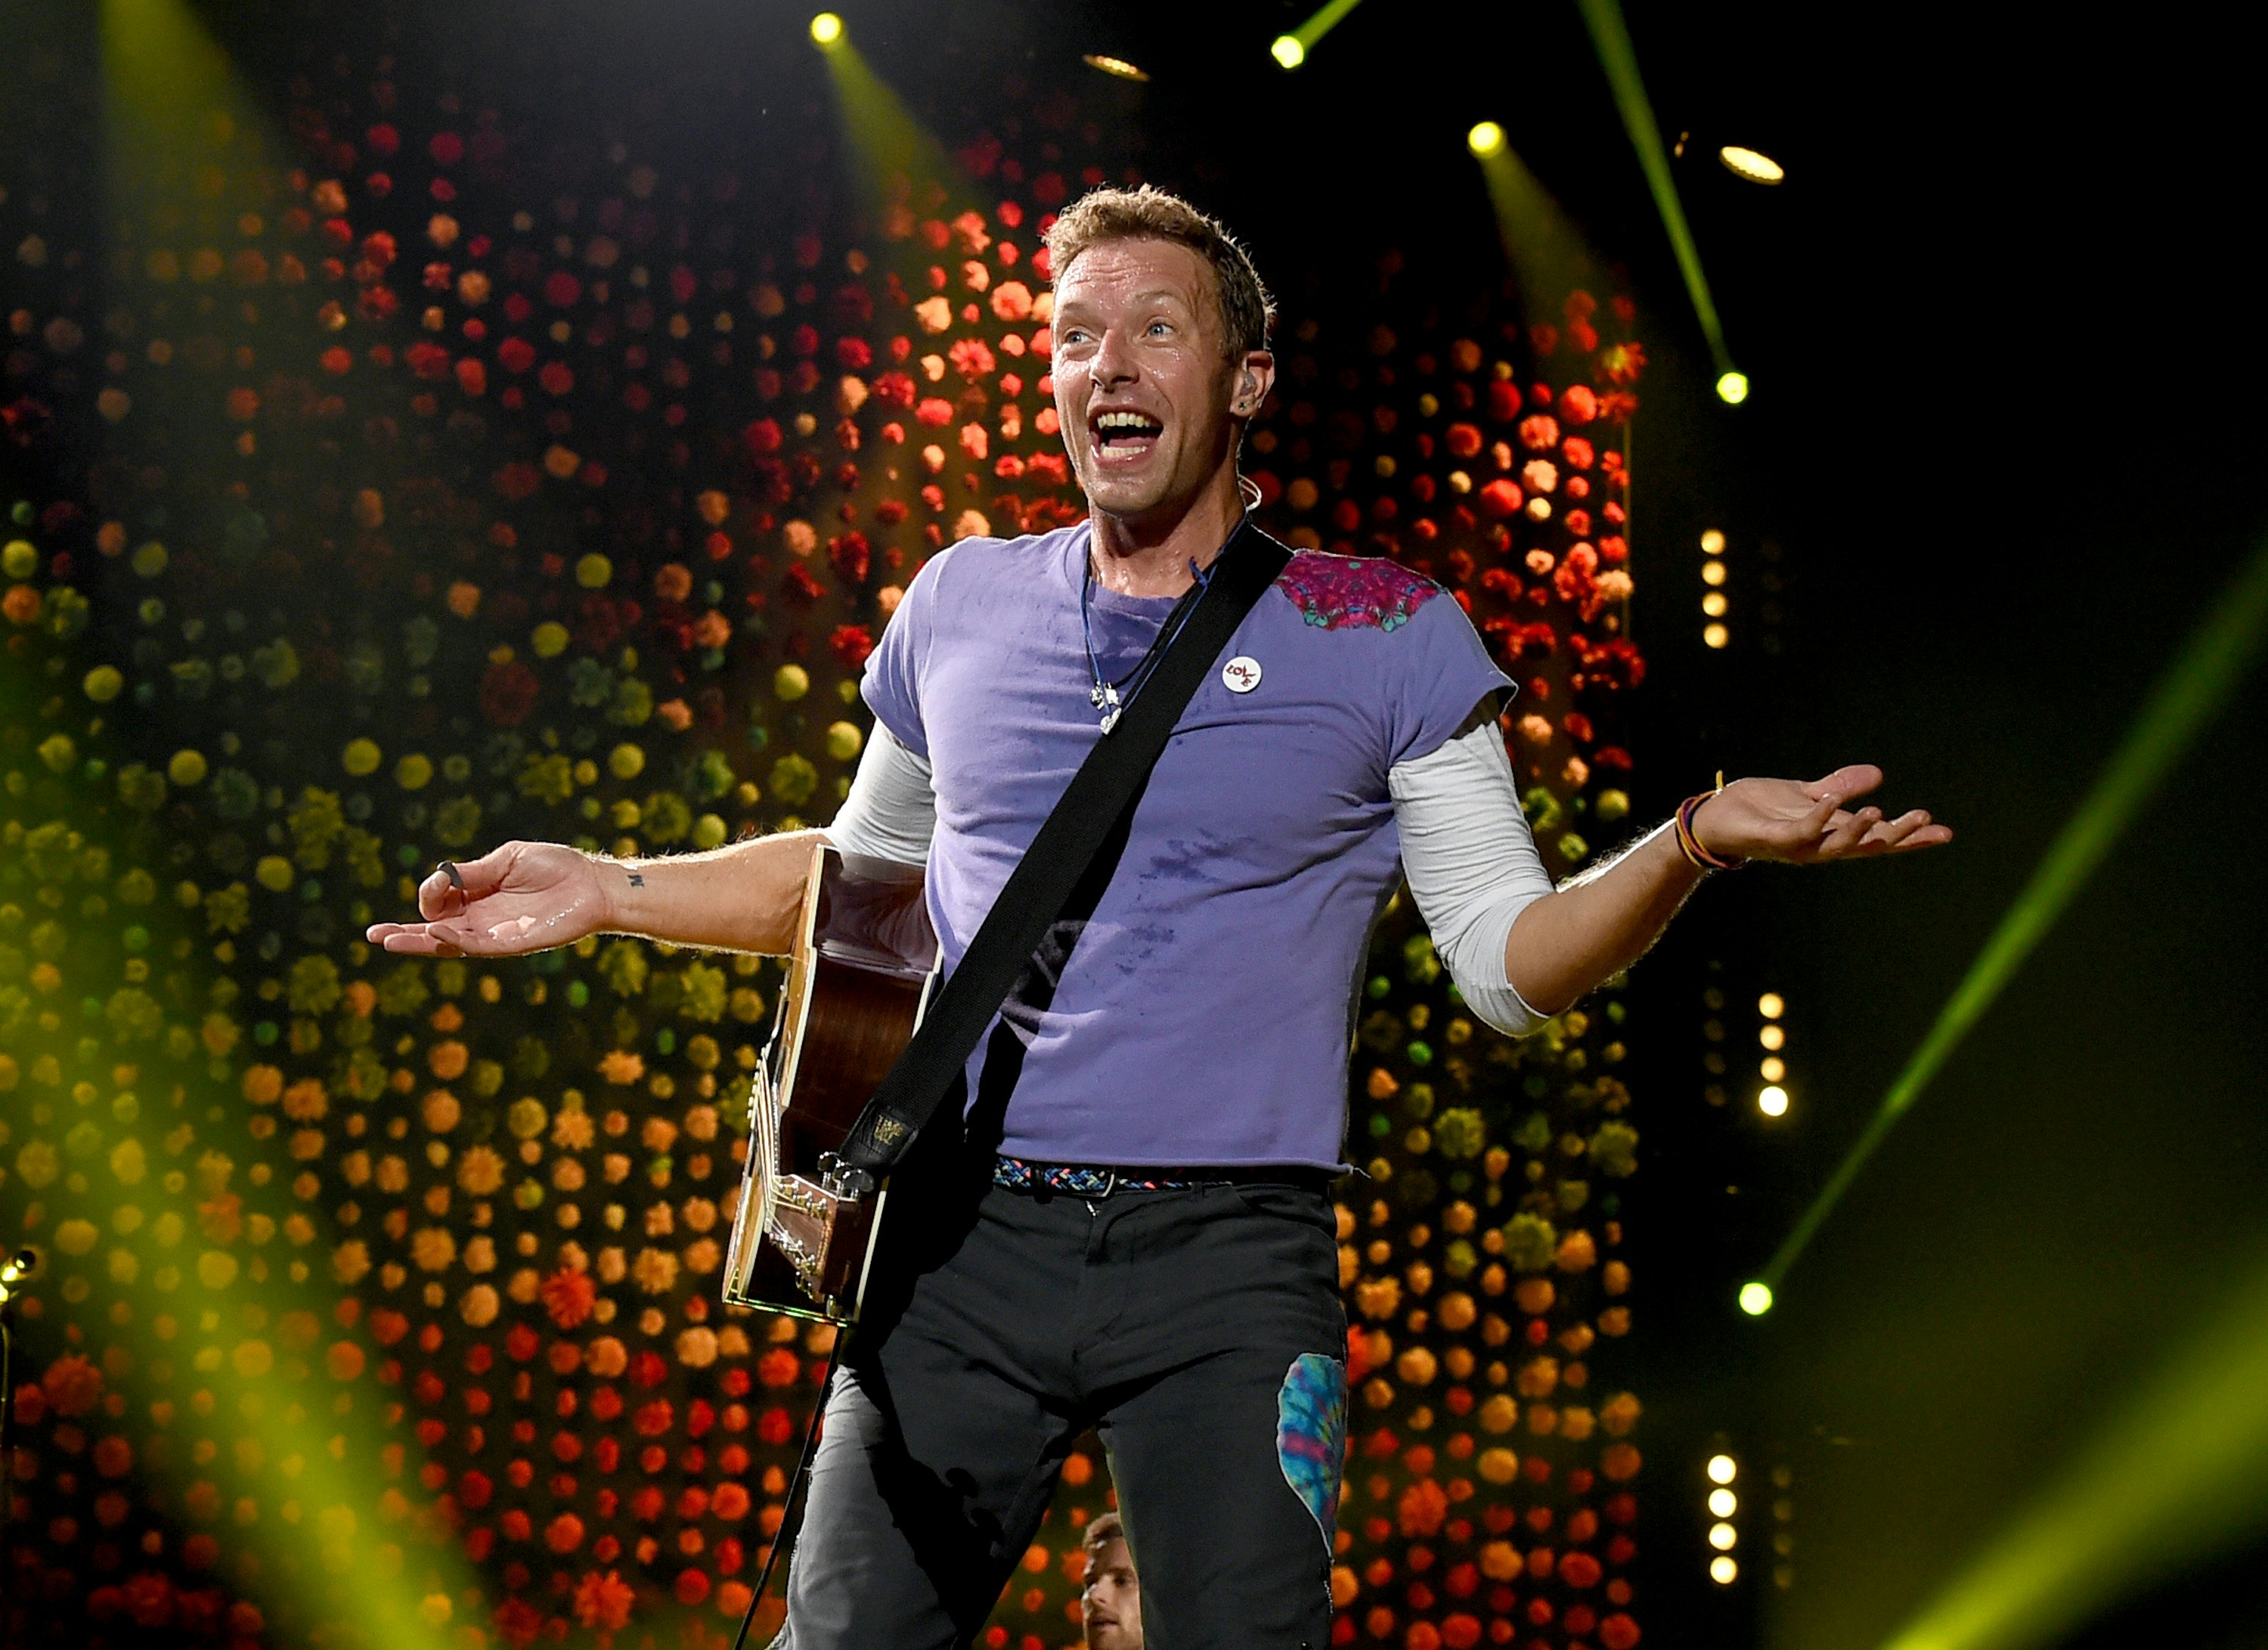 Spiksplinternieuw Will Coldplay Tour In 2020? The Band Could Be Back On The Road Soon AH-47